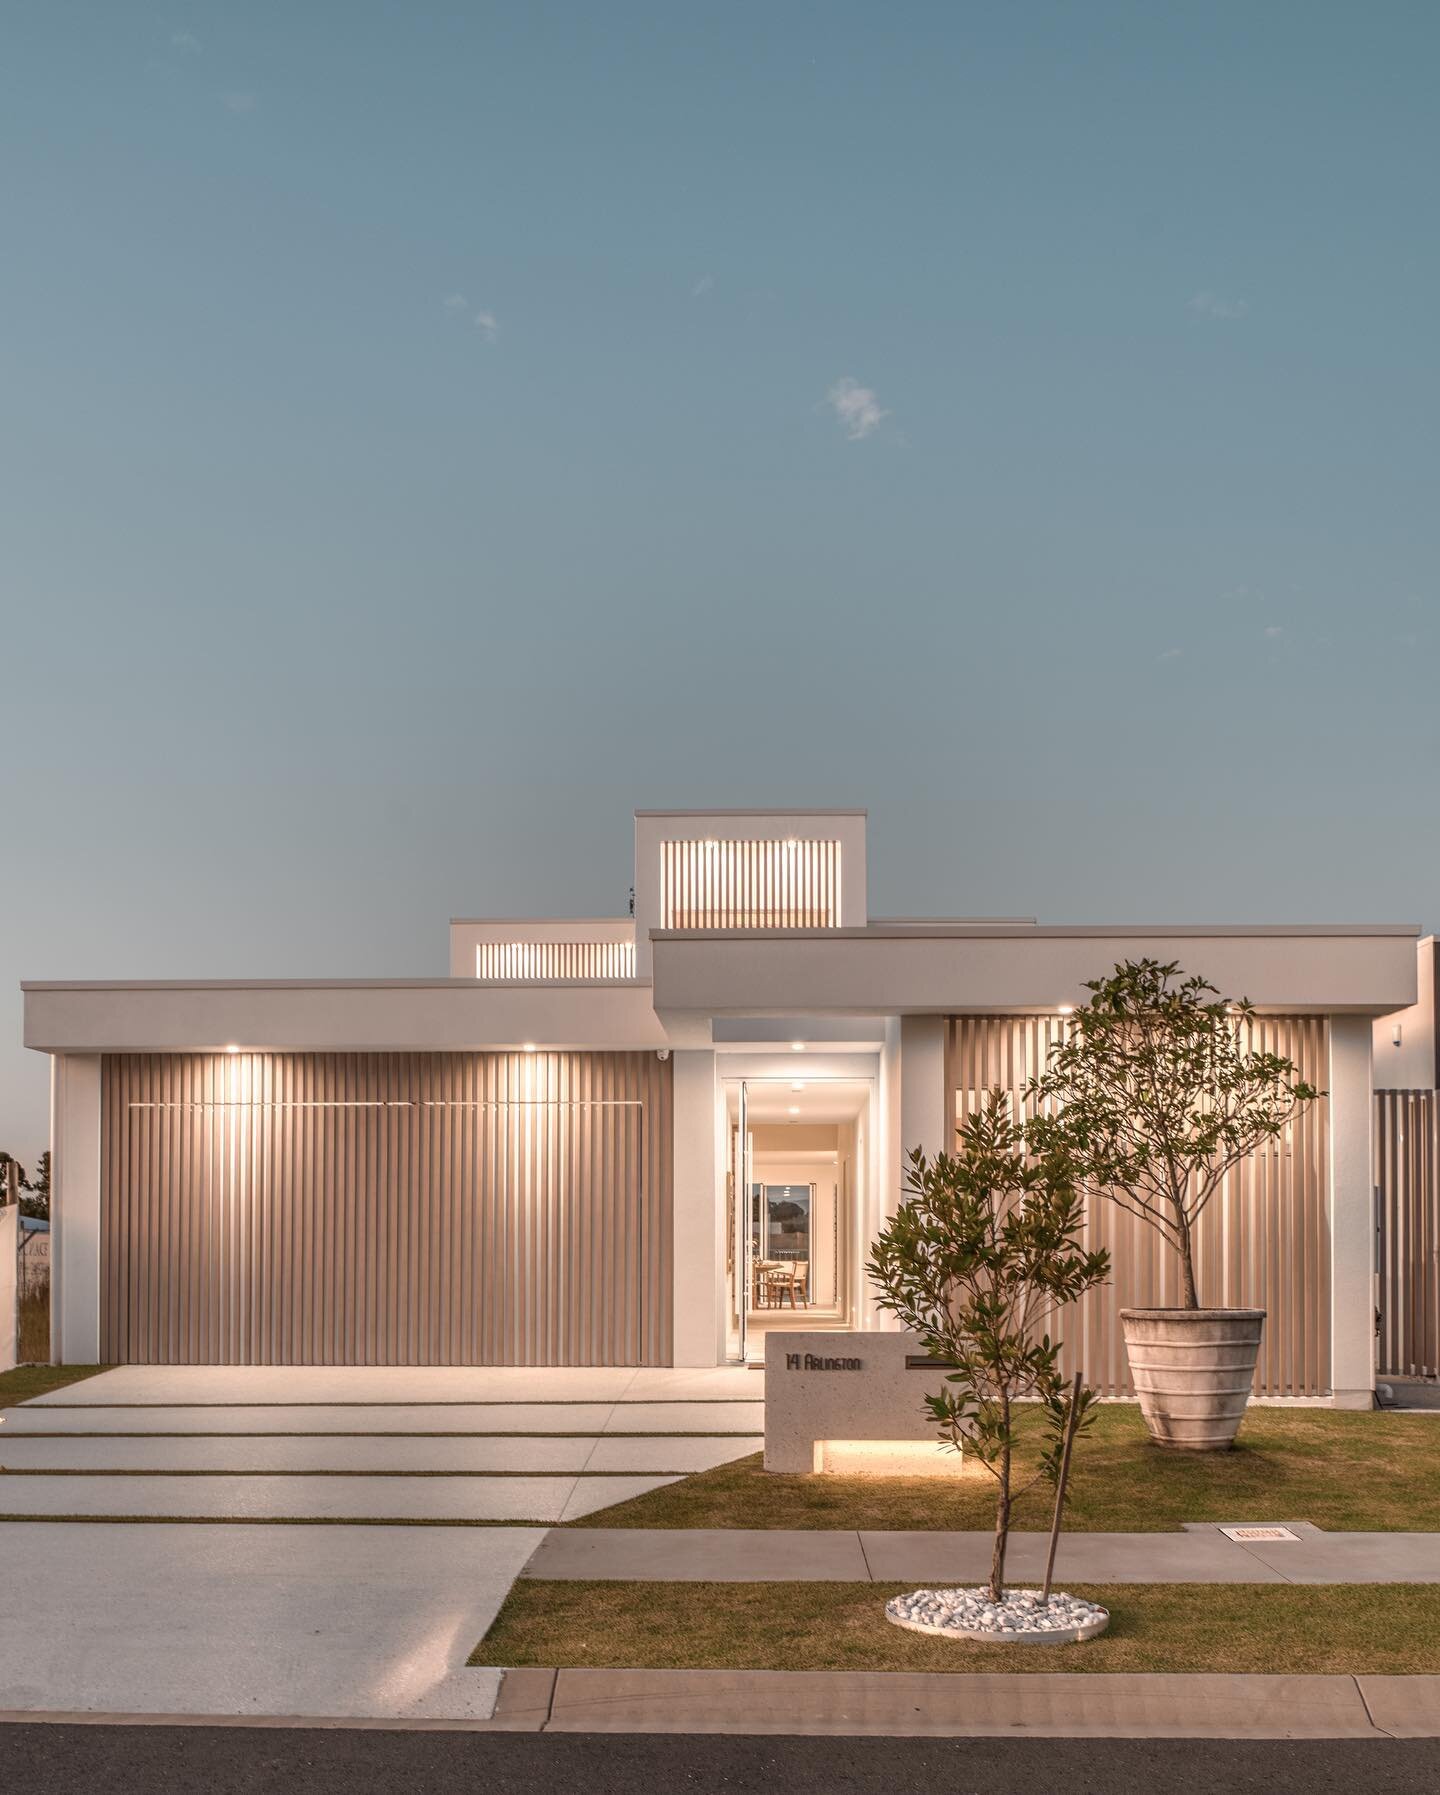 Our beautiful Display home right on dusk | PELICAN WATERS 

__________

Imagine arriving home to this | DREAMY 🤍

___________

Our display home will be open all weekend from 10am - 4pm | we look forward to welcoming you 🙌🏼

__________

#qldbuilt #